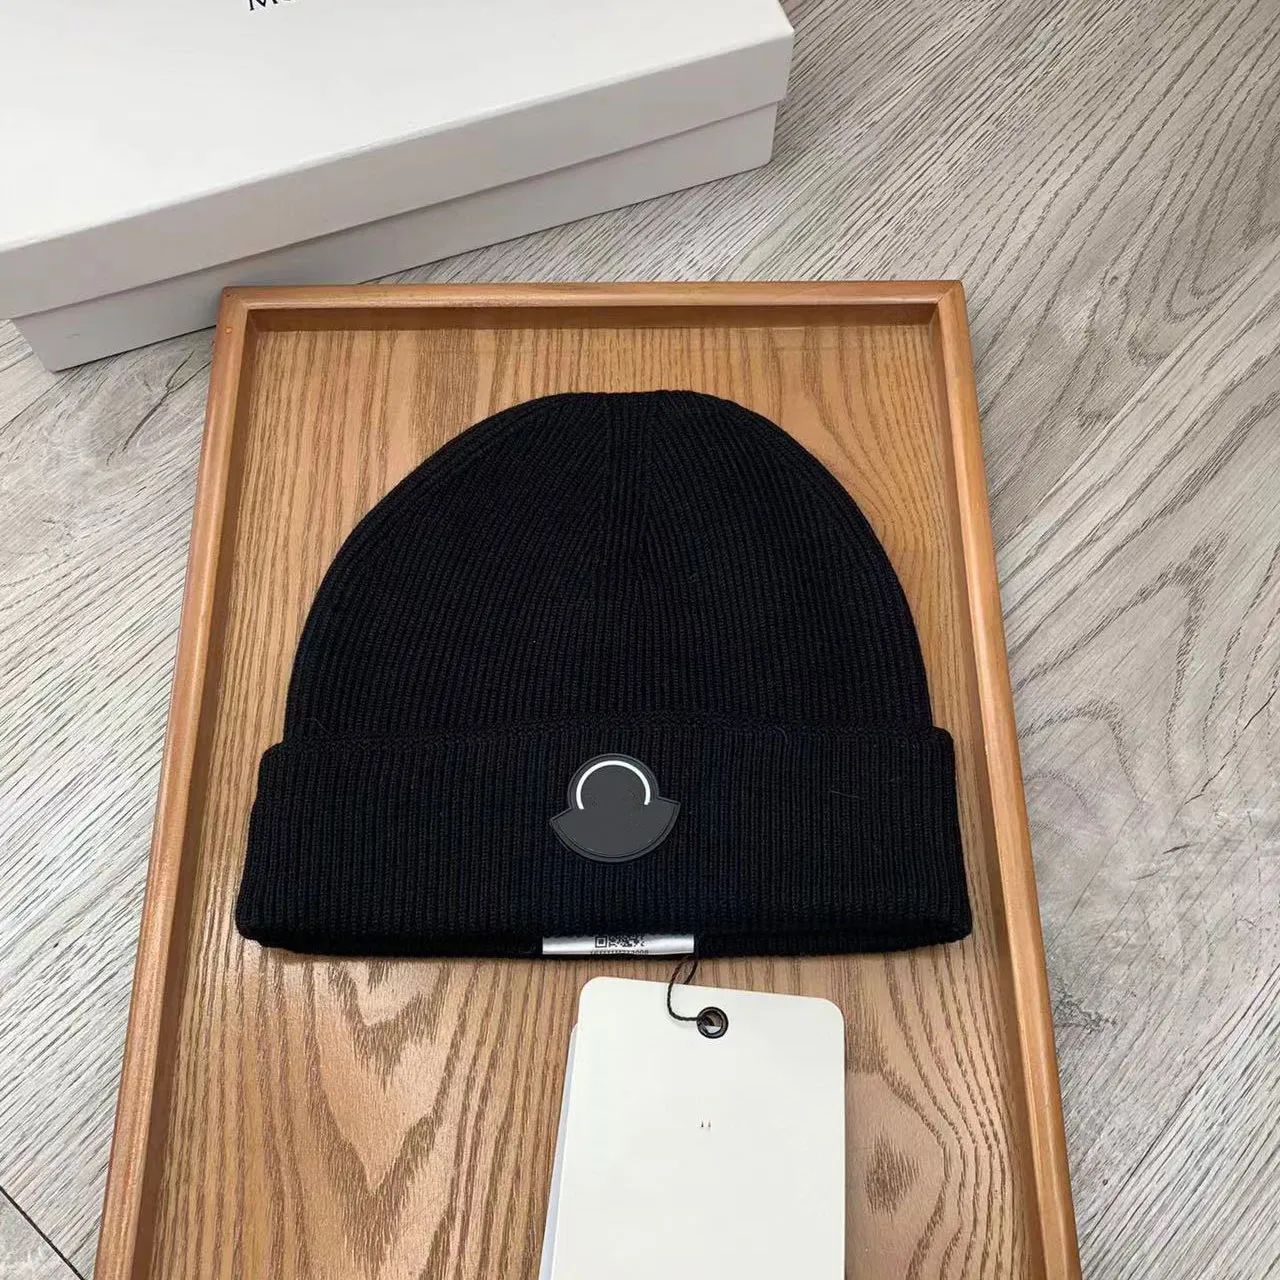 designers Beanie Luxury Hat kull Cap Winter Unisex Cashmere Letters Casual Outdoor Bonnet Knit Hats 15 Color very good gift